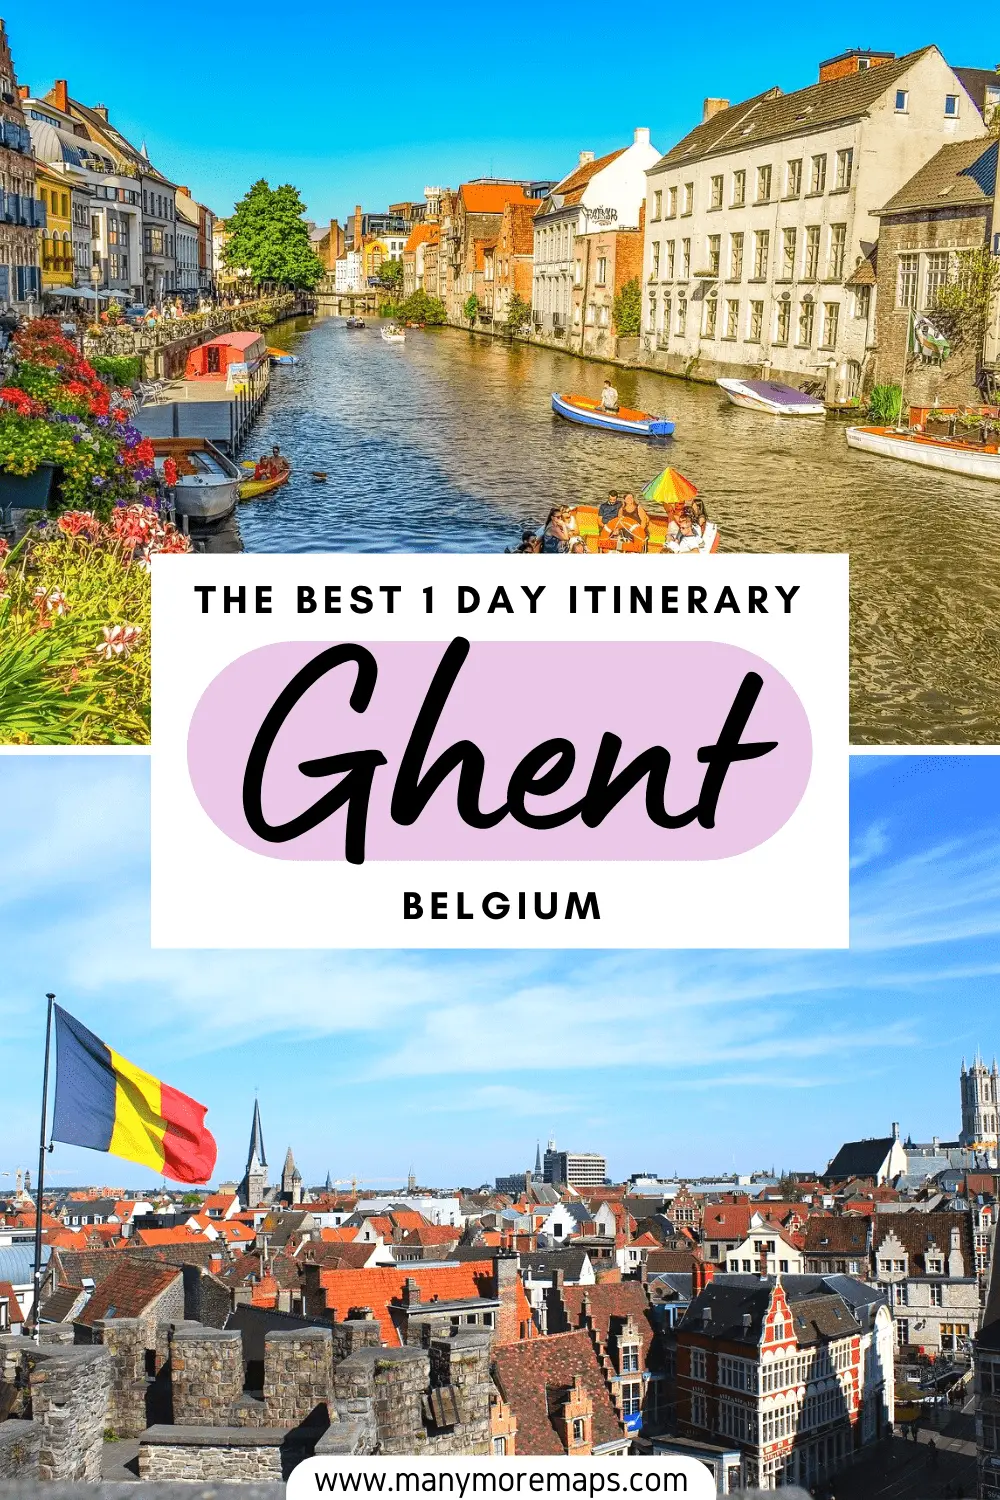 Planning a trip to Belgium and considering adding Ghent to your itinerary? Ghent is the perfect place to spend one day, and this Ghent itinerary includes all the best things to see, do and visit in Ghent, one of the best and prettiest cities in Belgium!